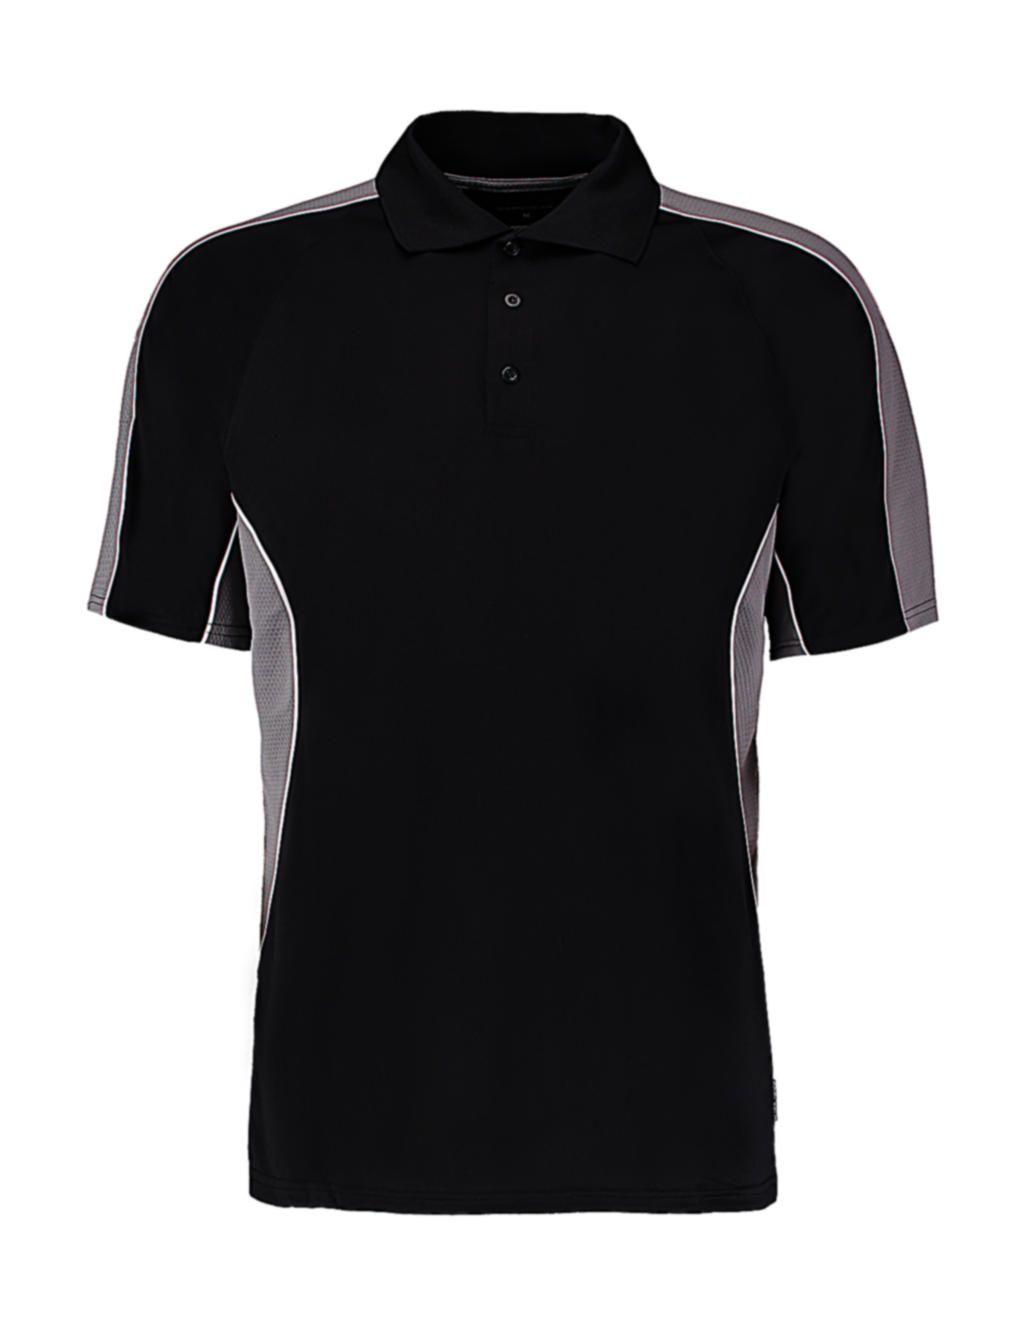  Classic Fit Cooltex? Contrast Polo Shirt in Farbe Black/Grey